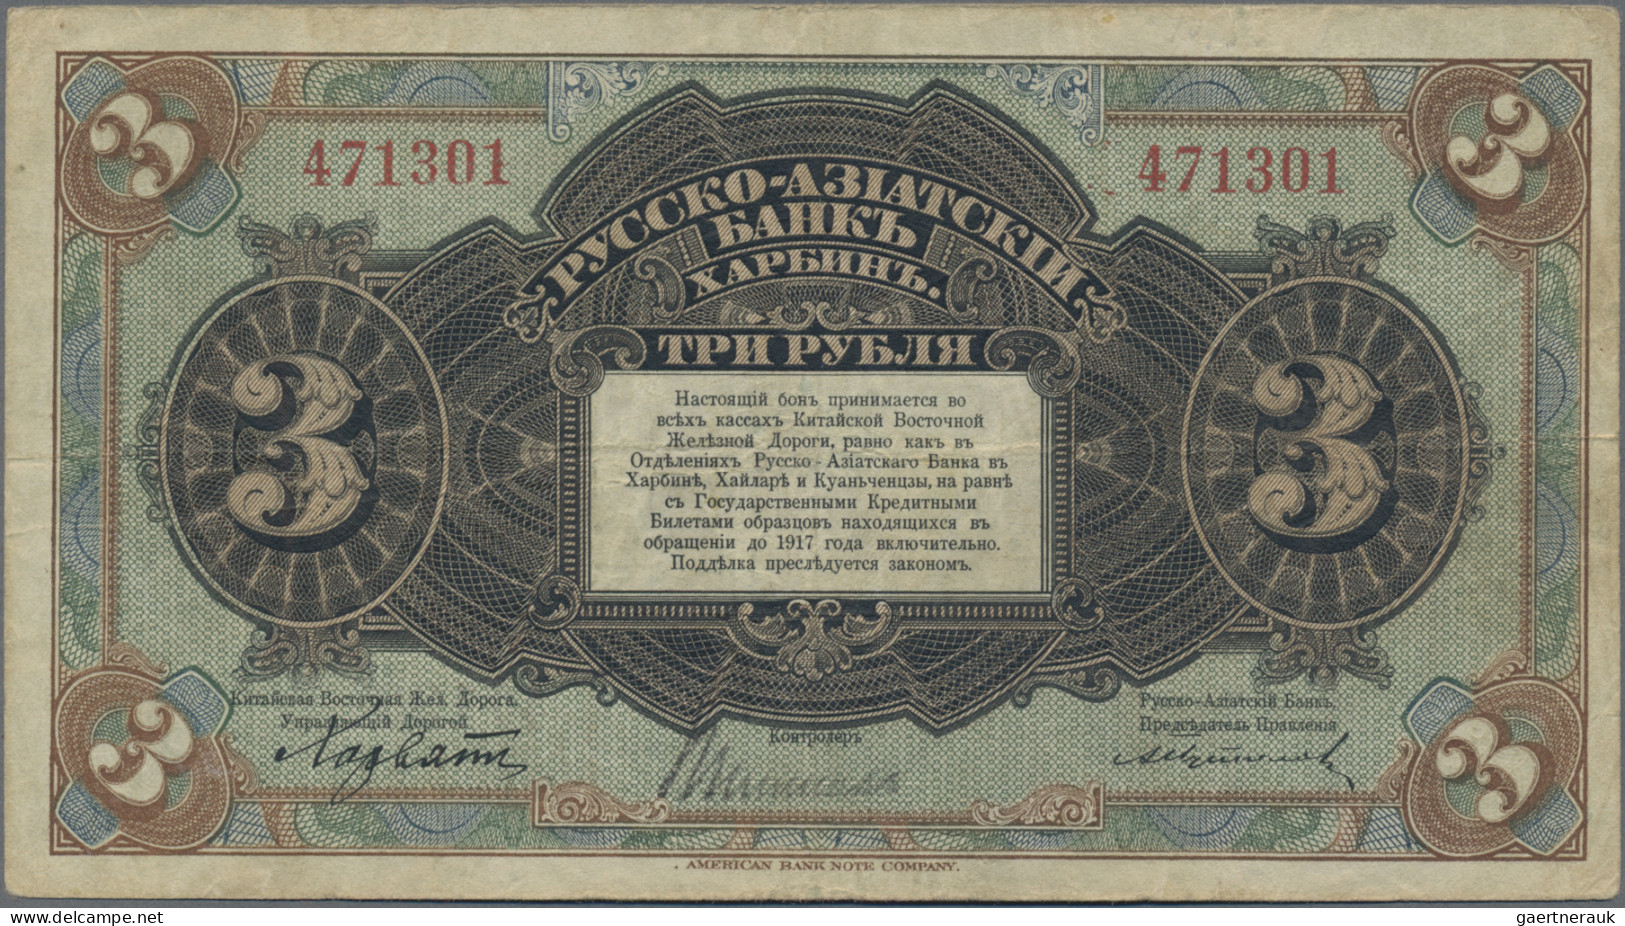 China: Russo-Asiatic Bank, Lot With 3 Banknotes, ND(1917) Series, With 50 Kopeks - Chine